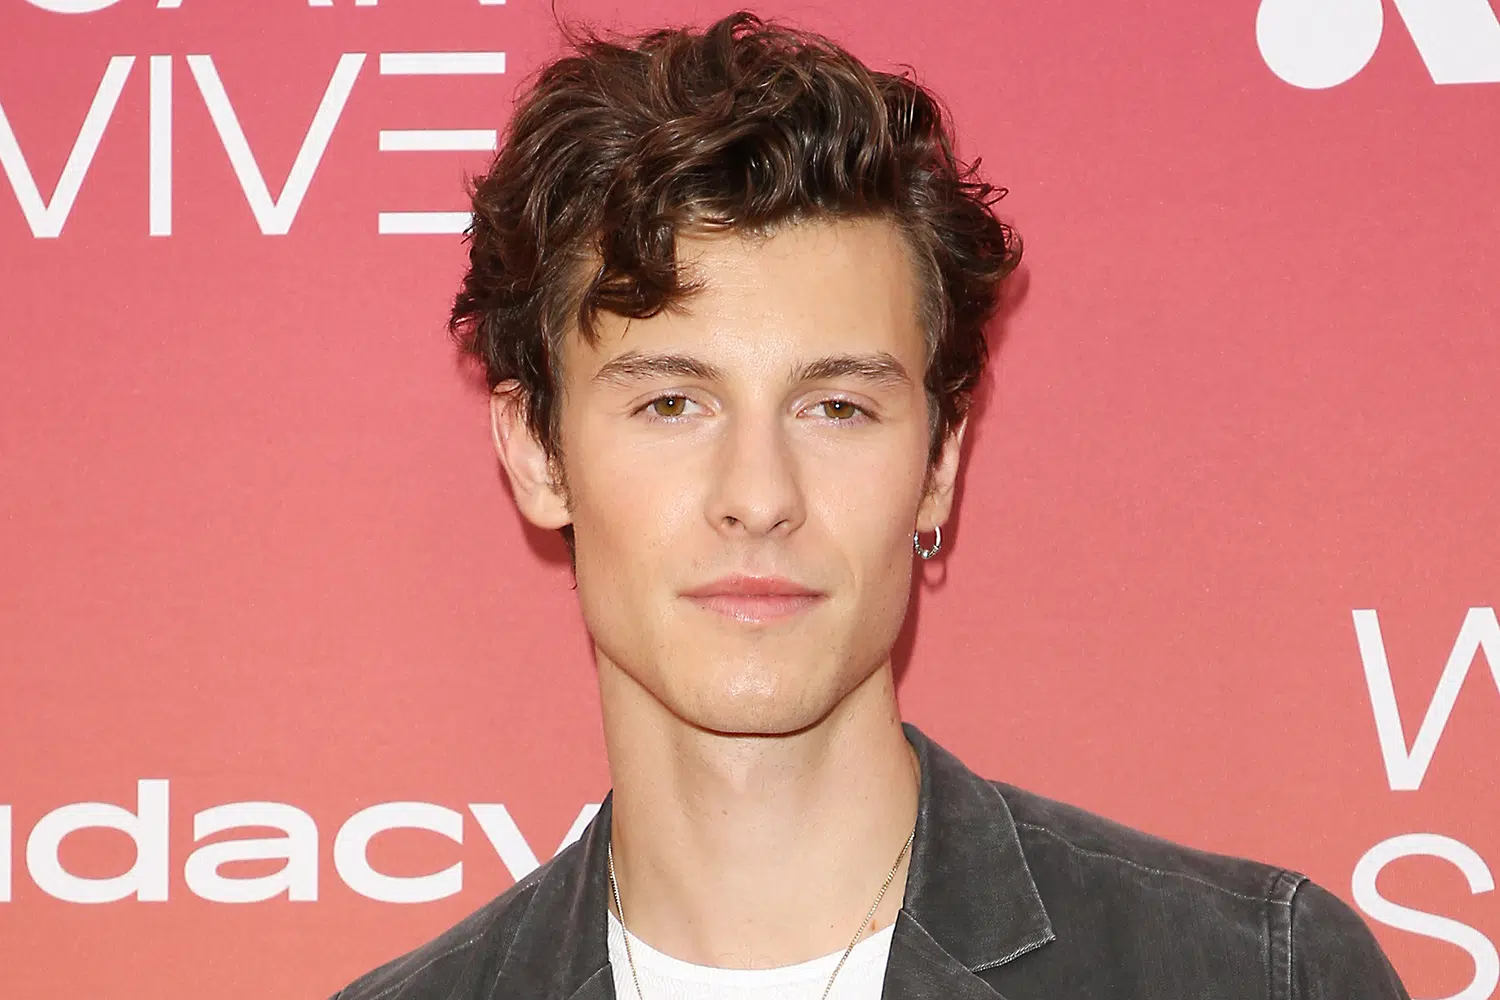 Shawn Mendes Cancels All Tour Dates to Focus on Mental Health